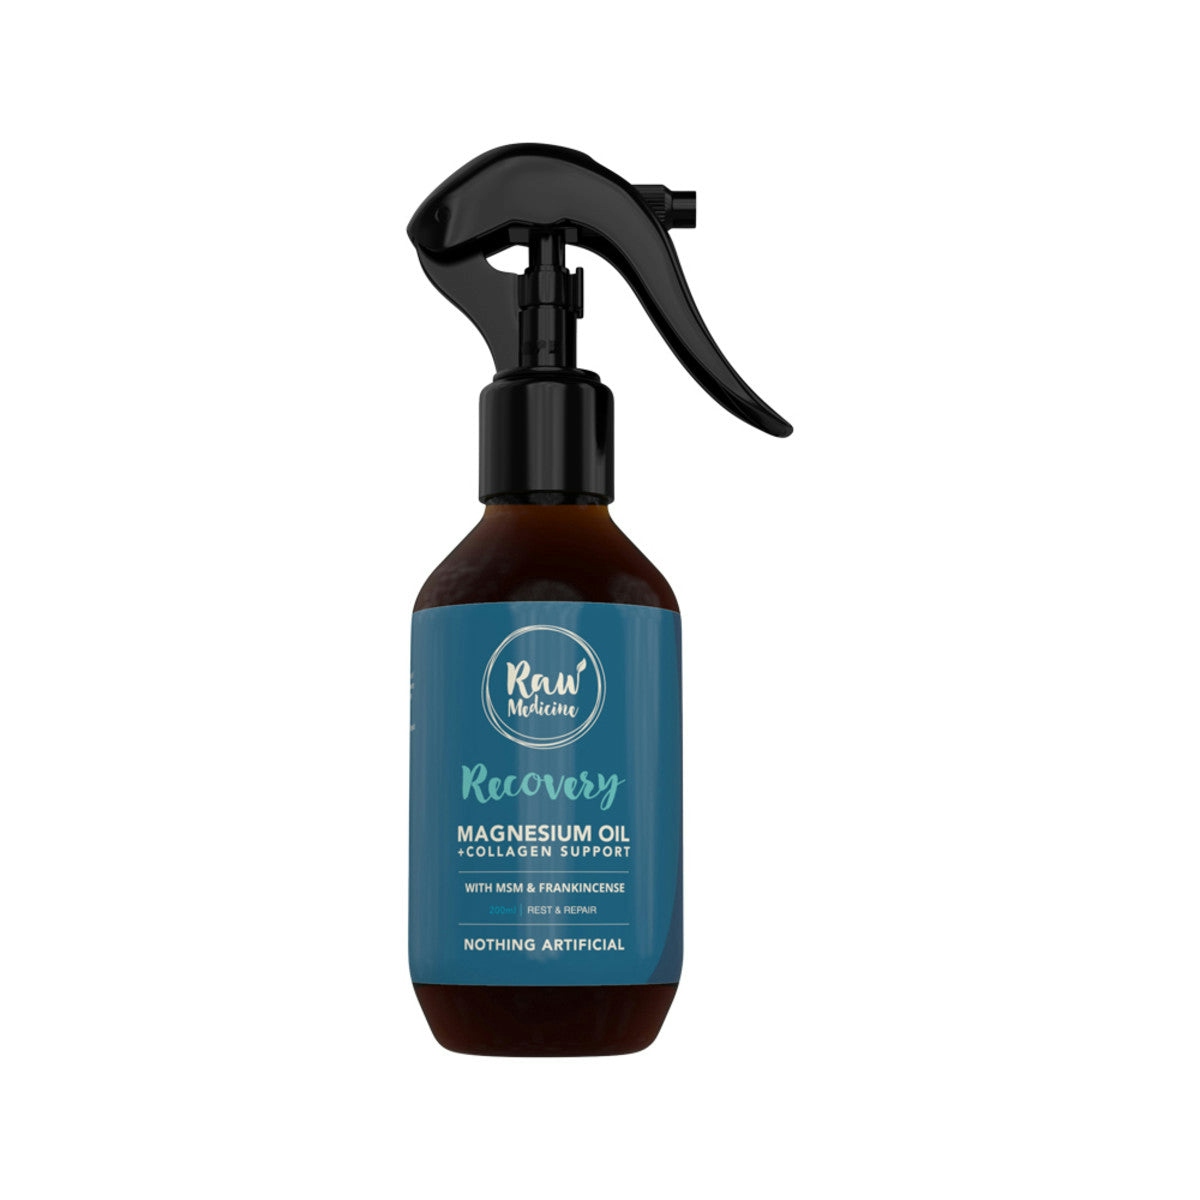 image of Raw Medicine Magnesium Oil + Collagen Support Recovery Spray 200ml on white background